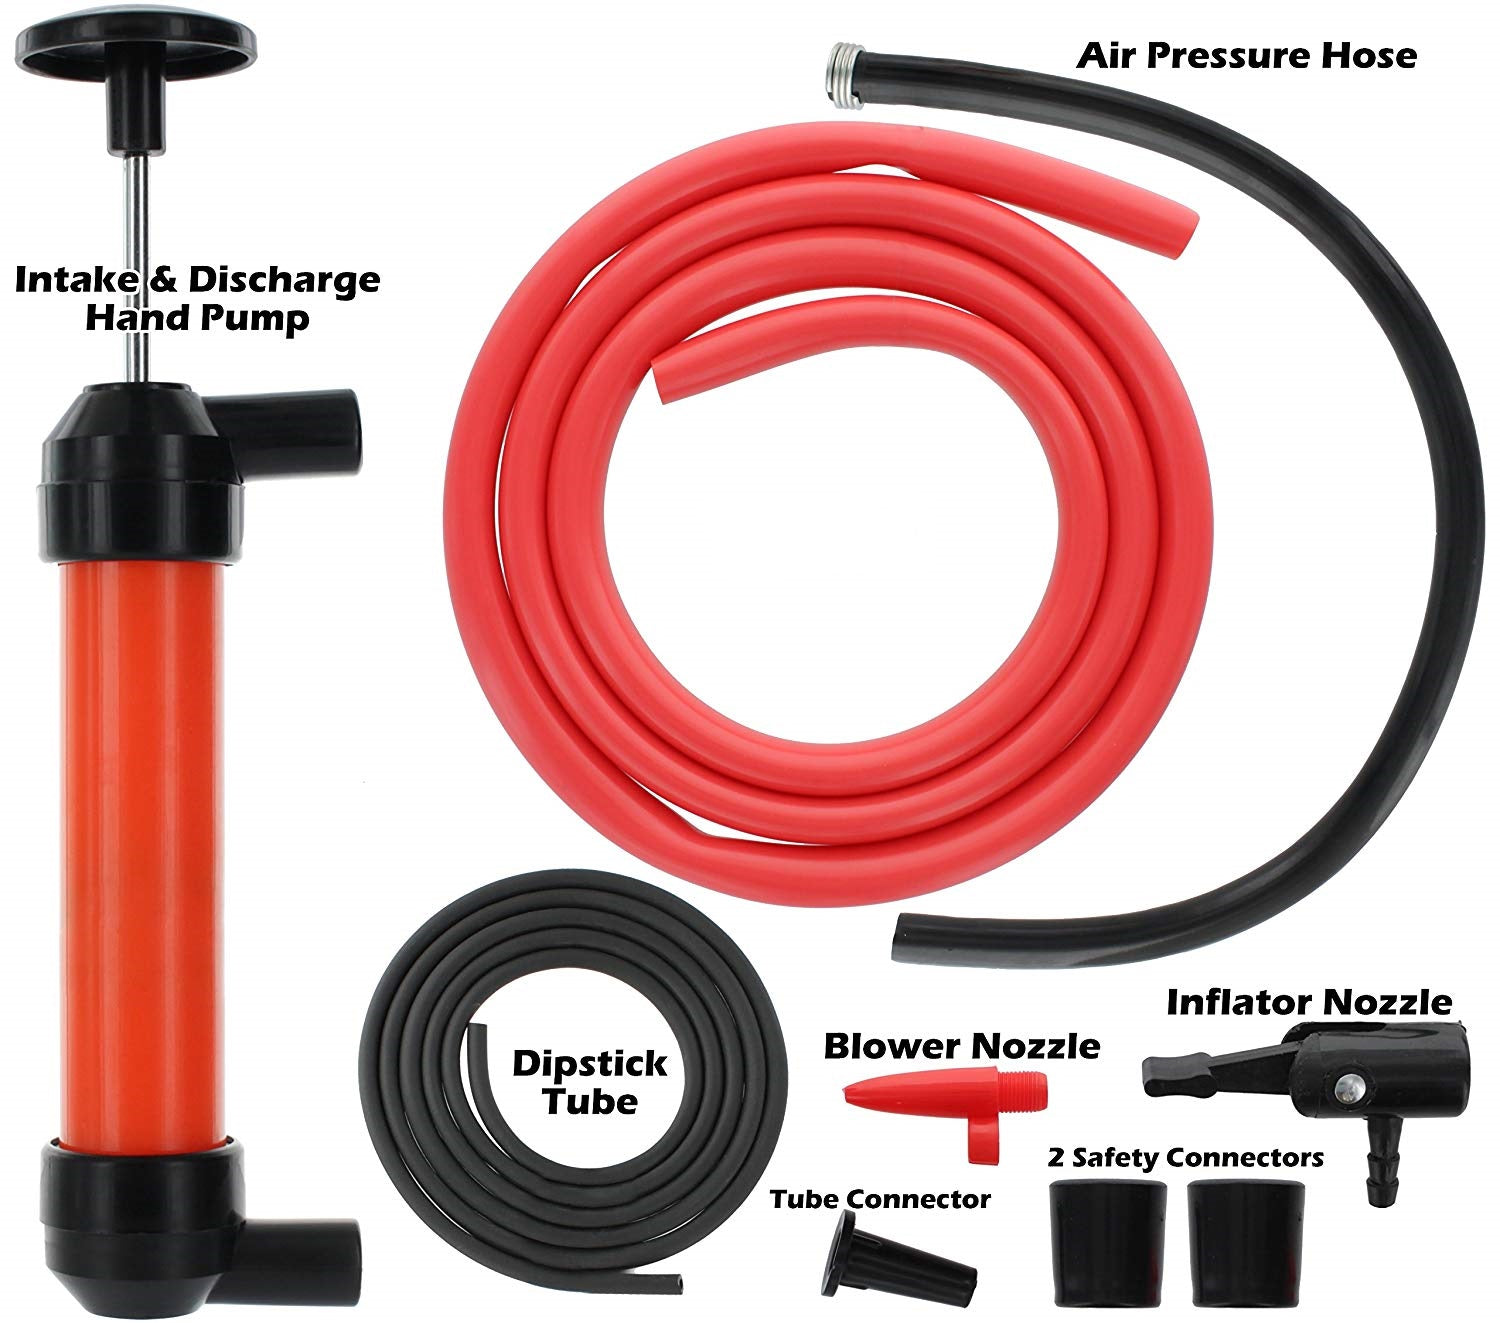 Heavy Duty Multi-Use Siphon Fuel Transfer Pump Kit (for Gas Oil, Liquids and Air)